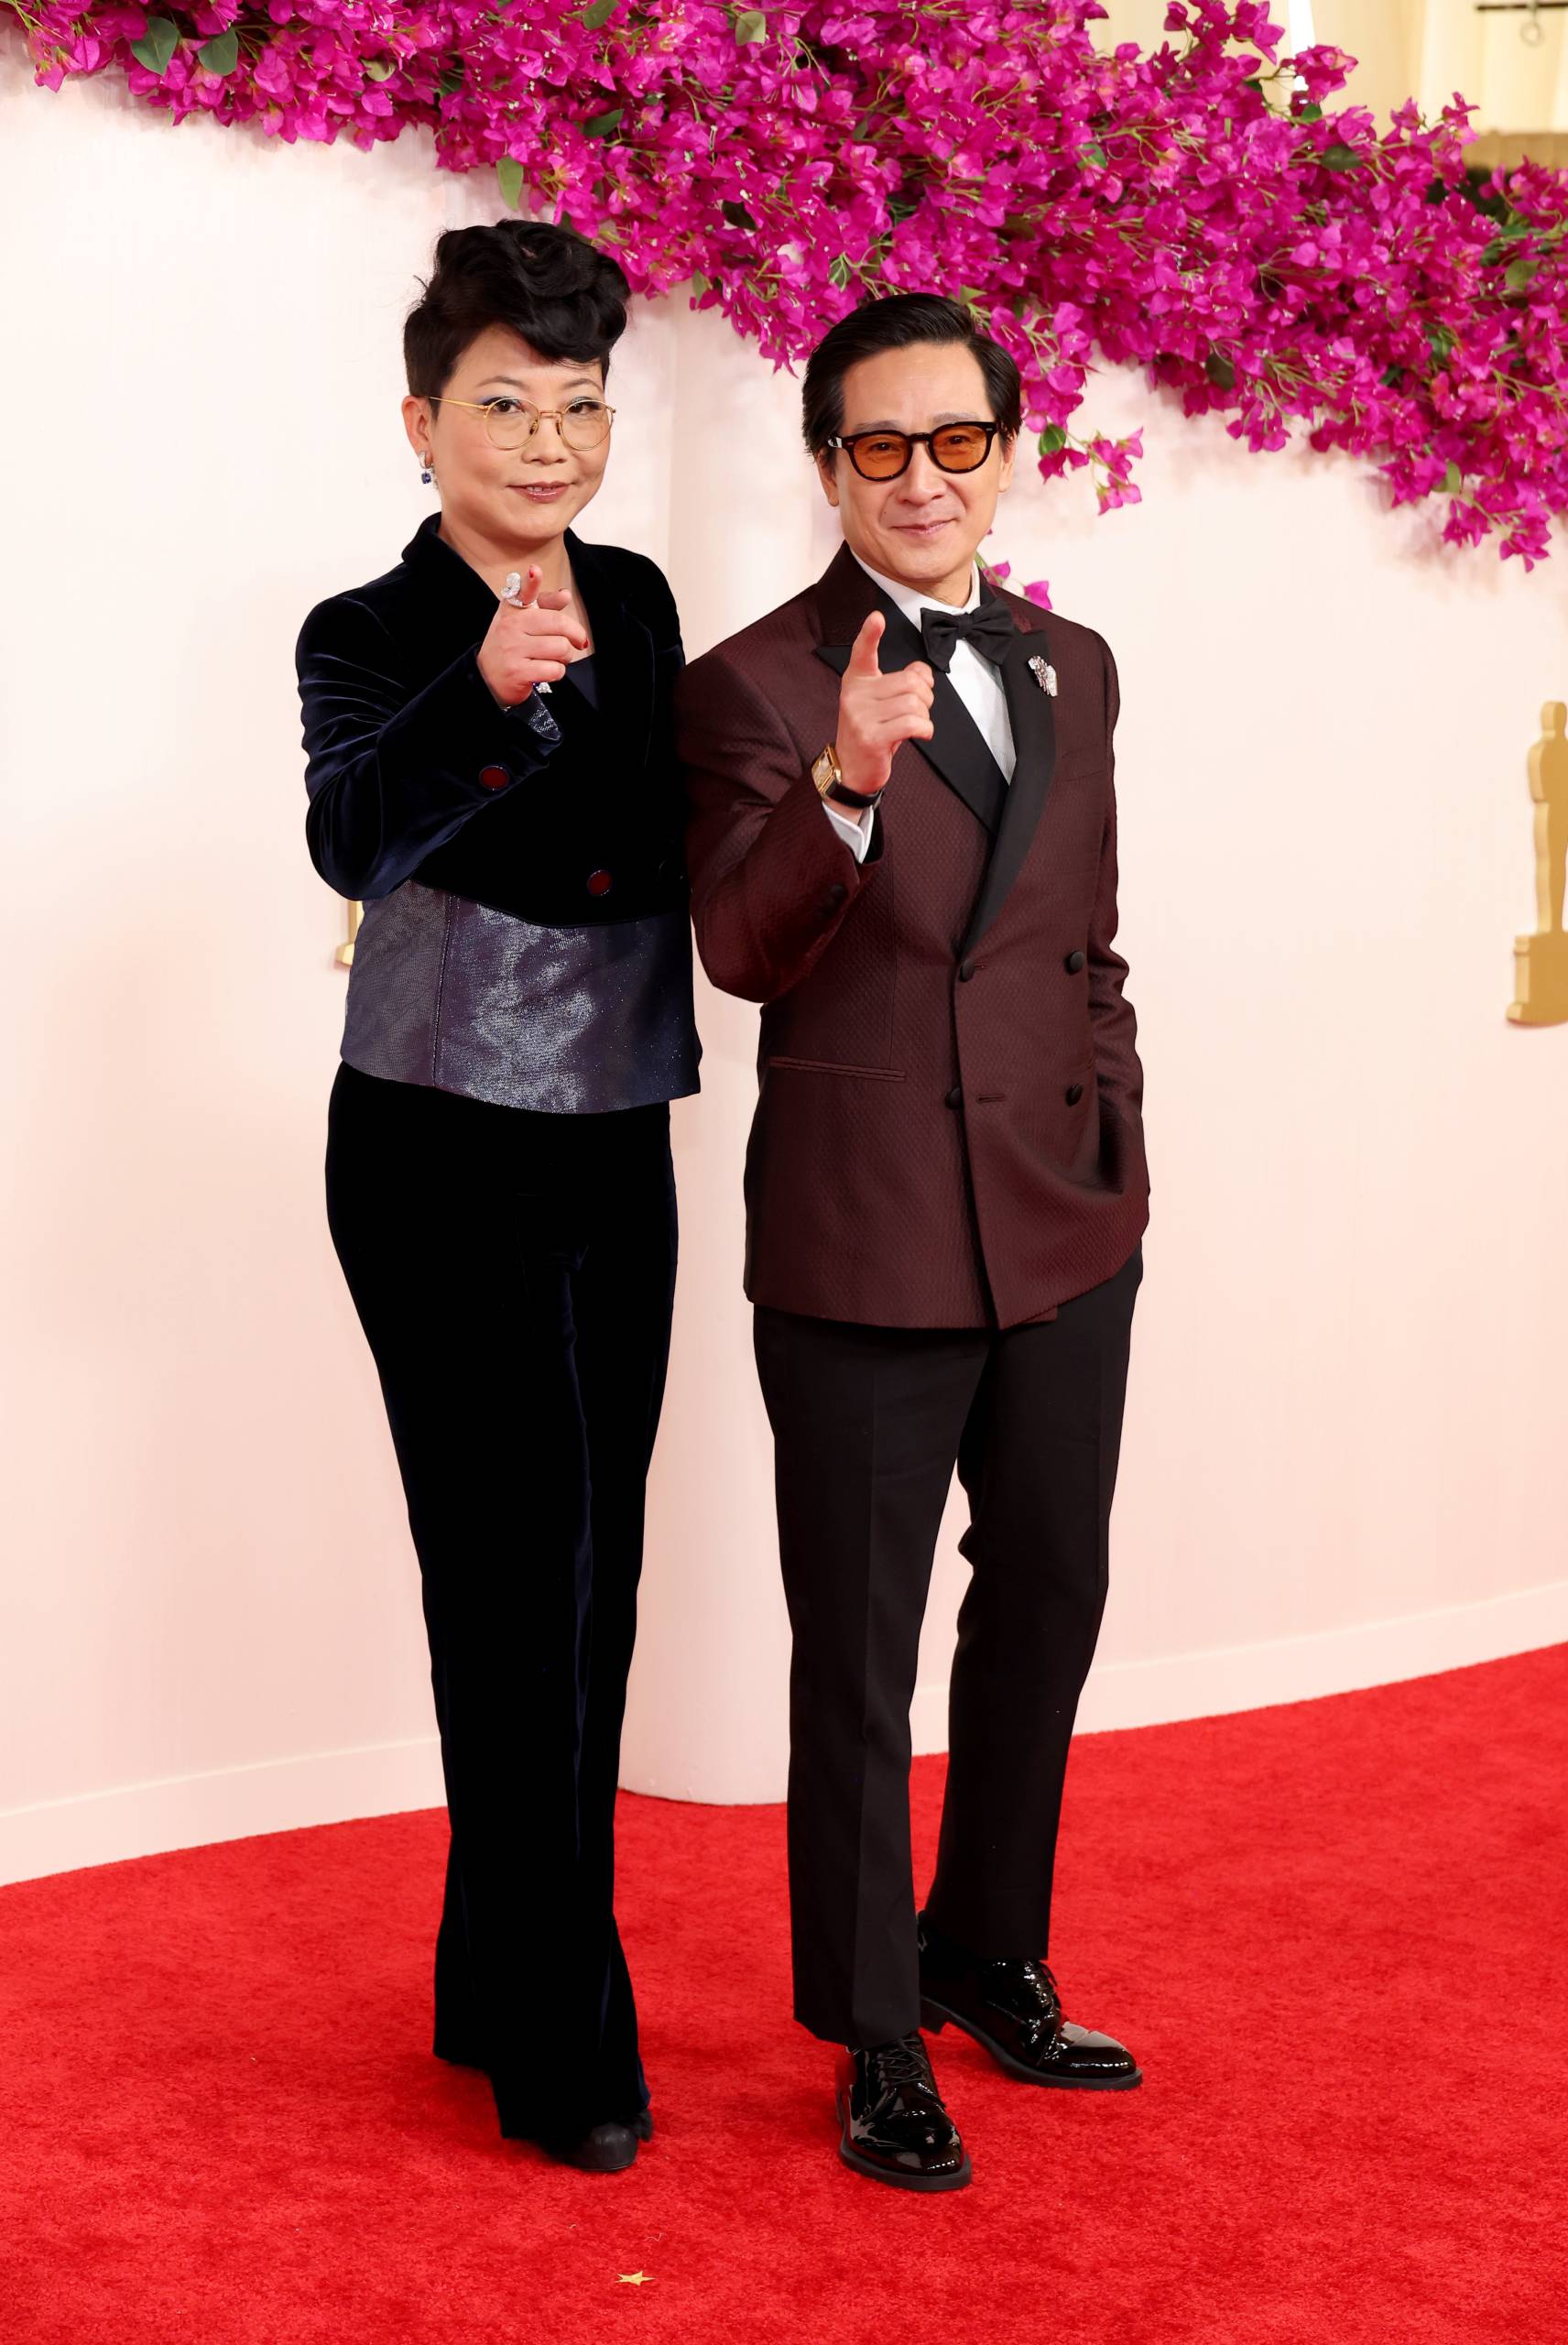 An Asian woman in a black suit stands with an Asian man in a bergundy tuxedo. They are both gesturing to the camera.